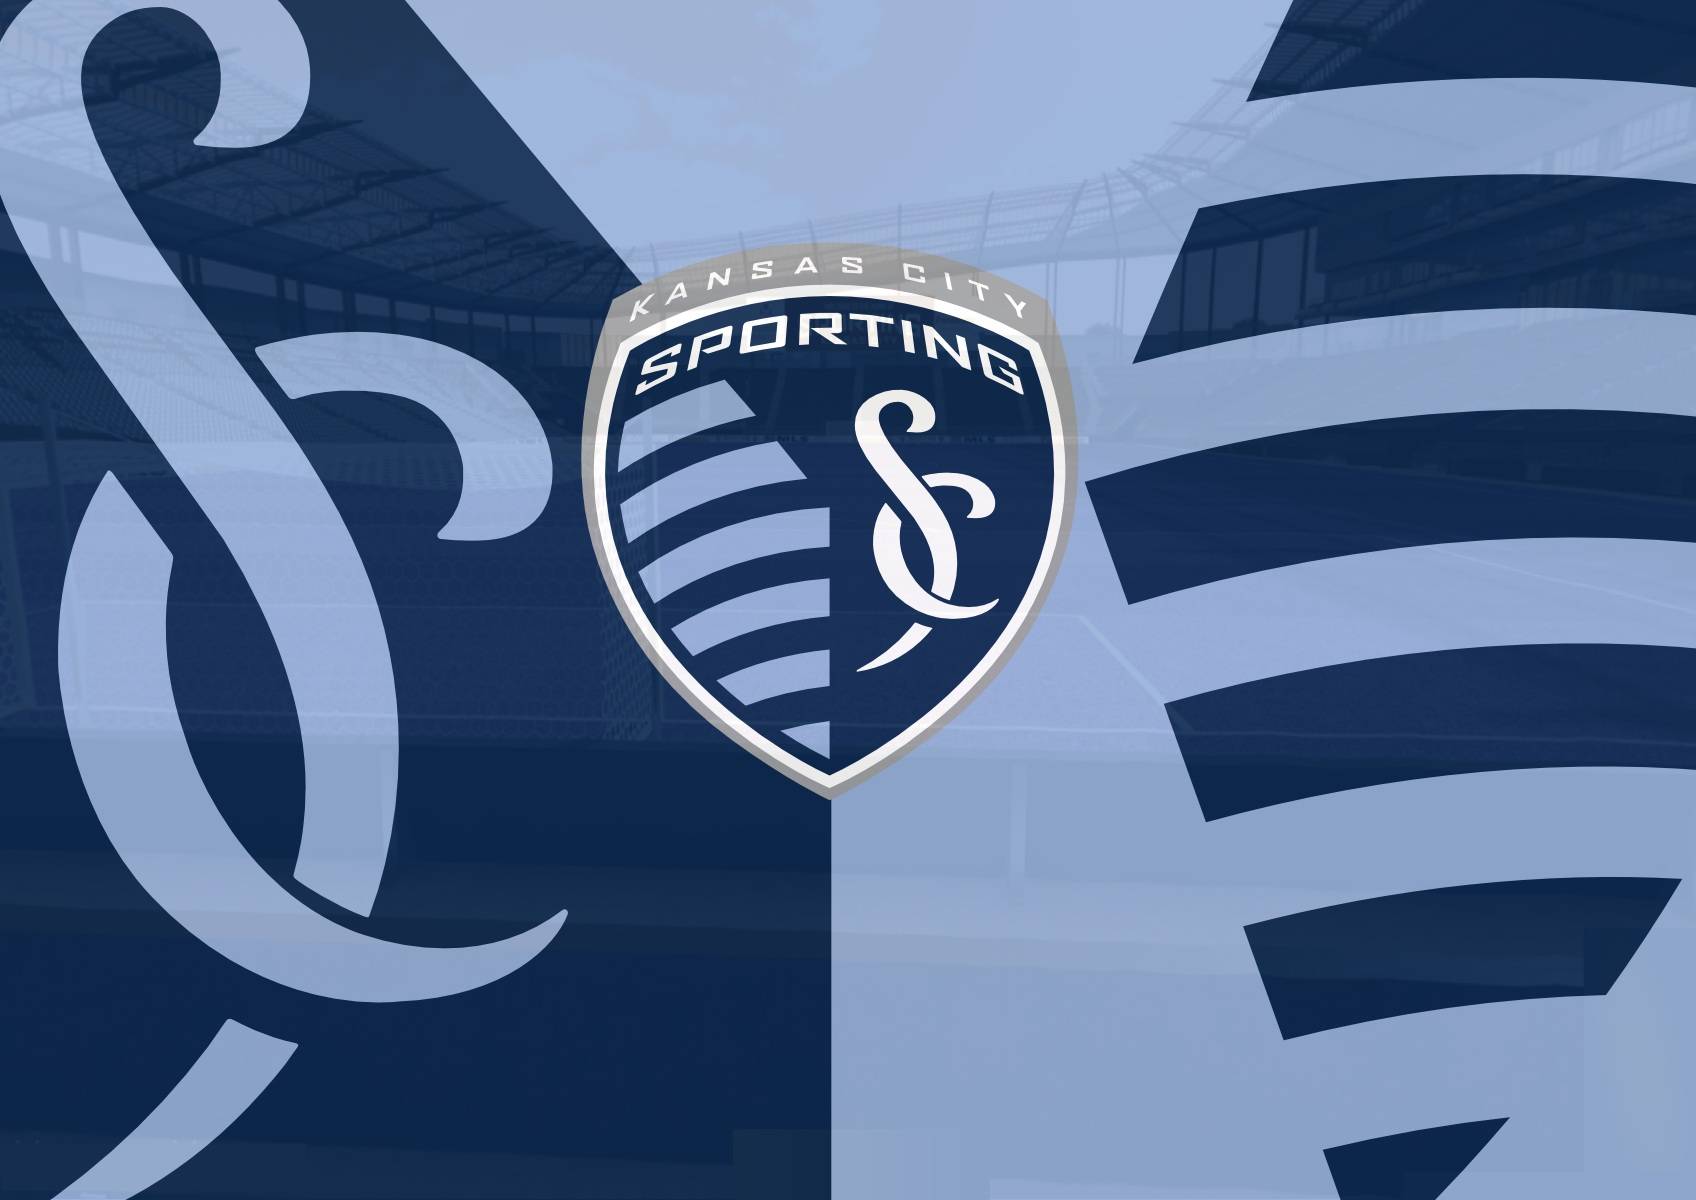 Sporting Kansas City Football Wallpaper Backgrounds and Picture 1696x1200